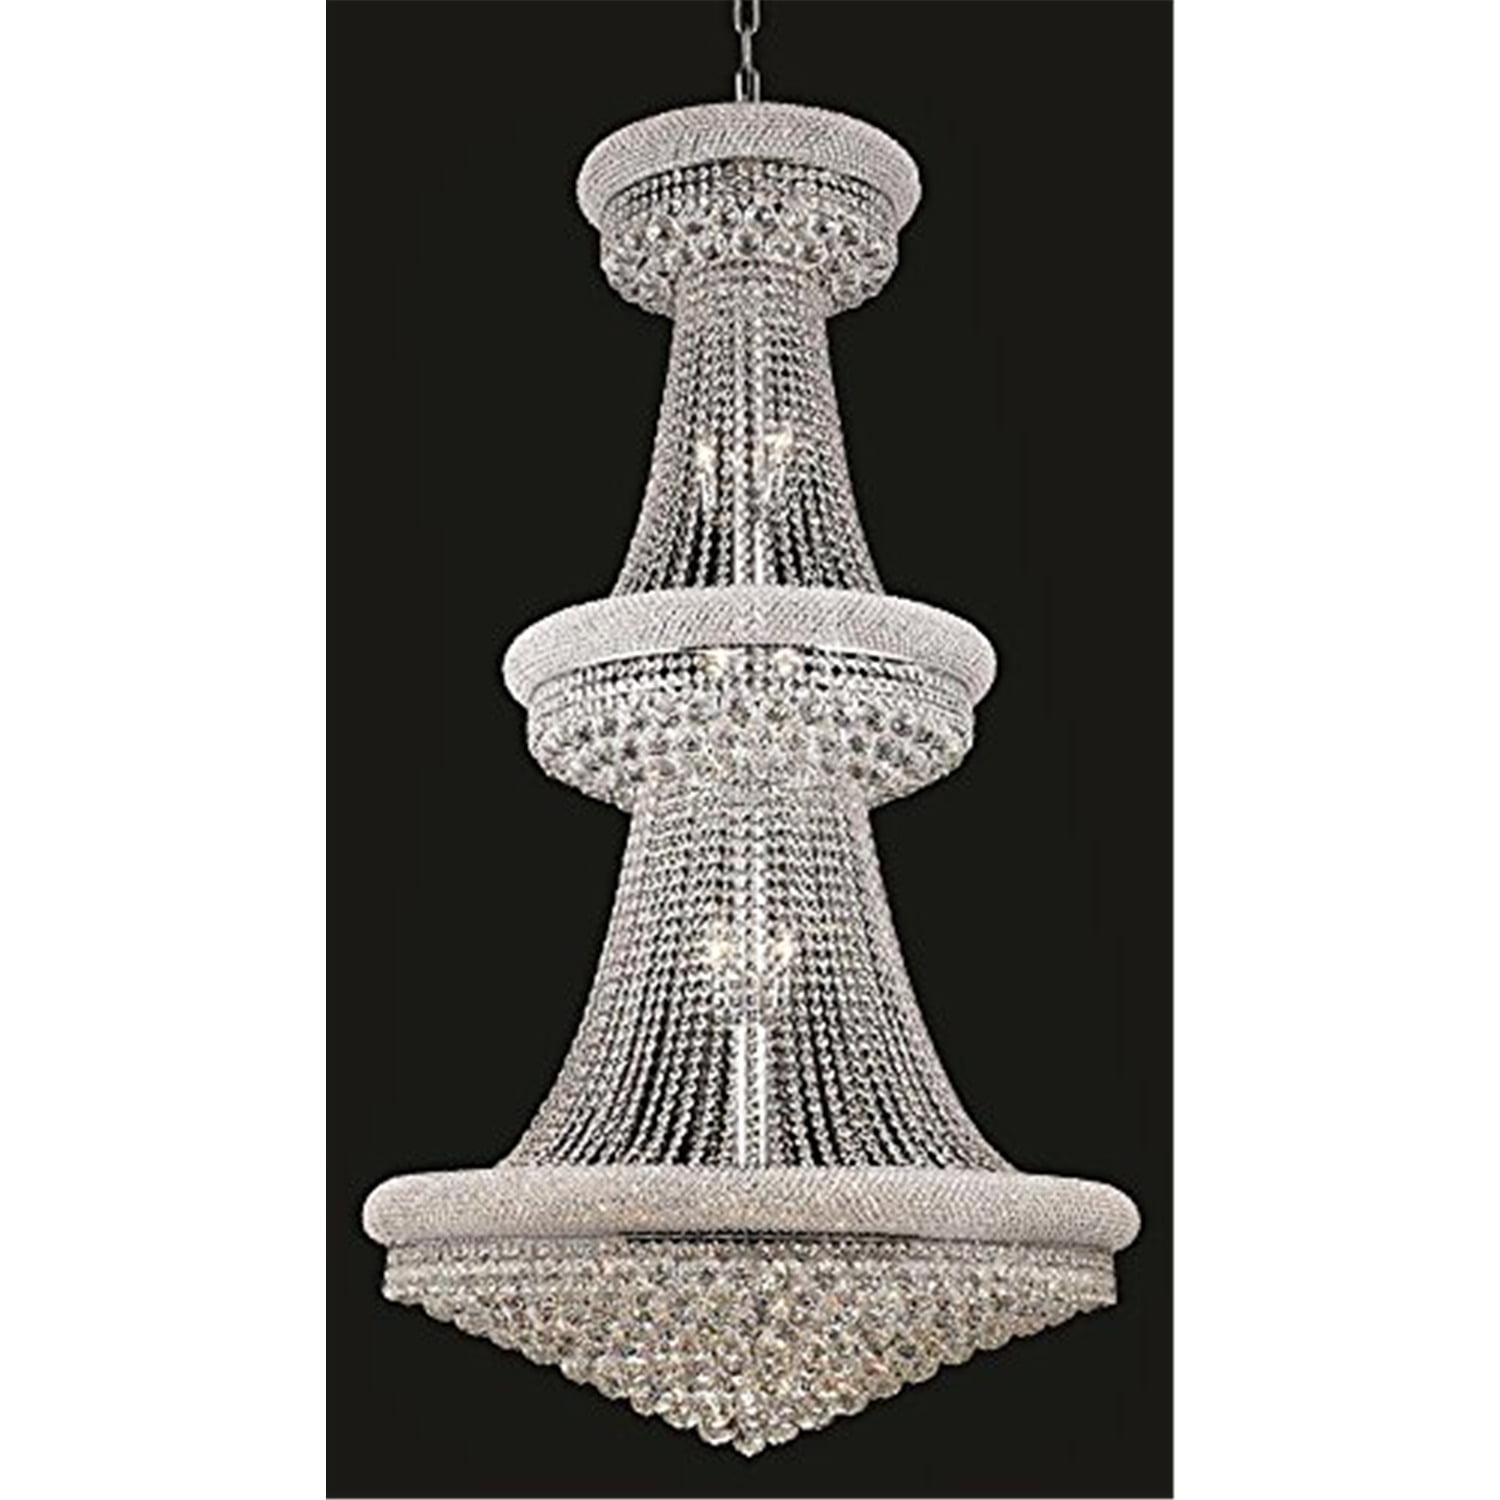 Primo Chrome Finish 32-Light Crystal Chandelier with Royal Cut Trim